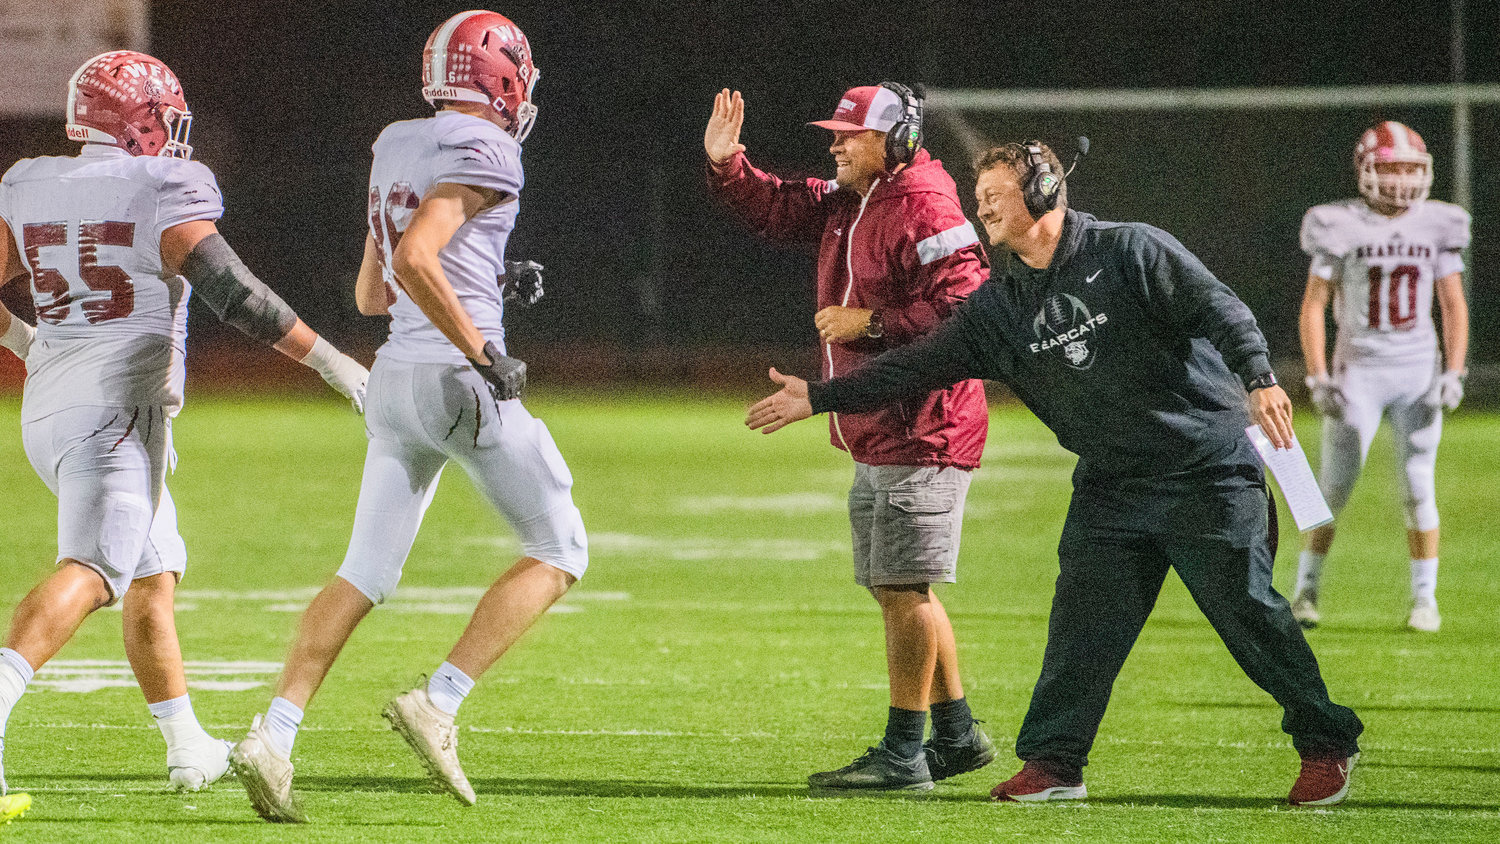 Bearcat coaches greet players with high-fives after a score Friday night in Centralia.